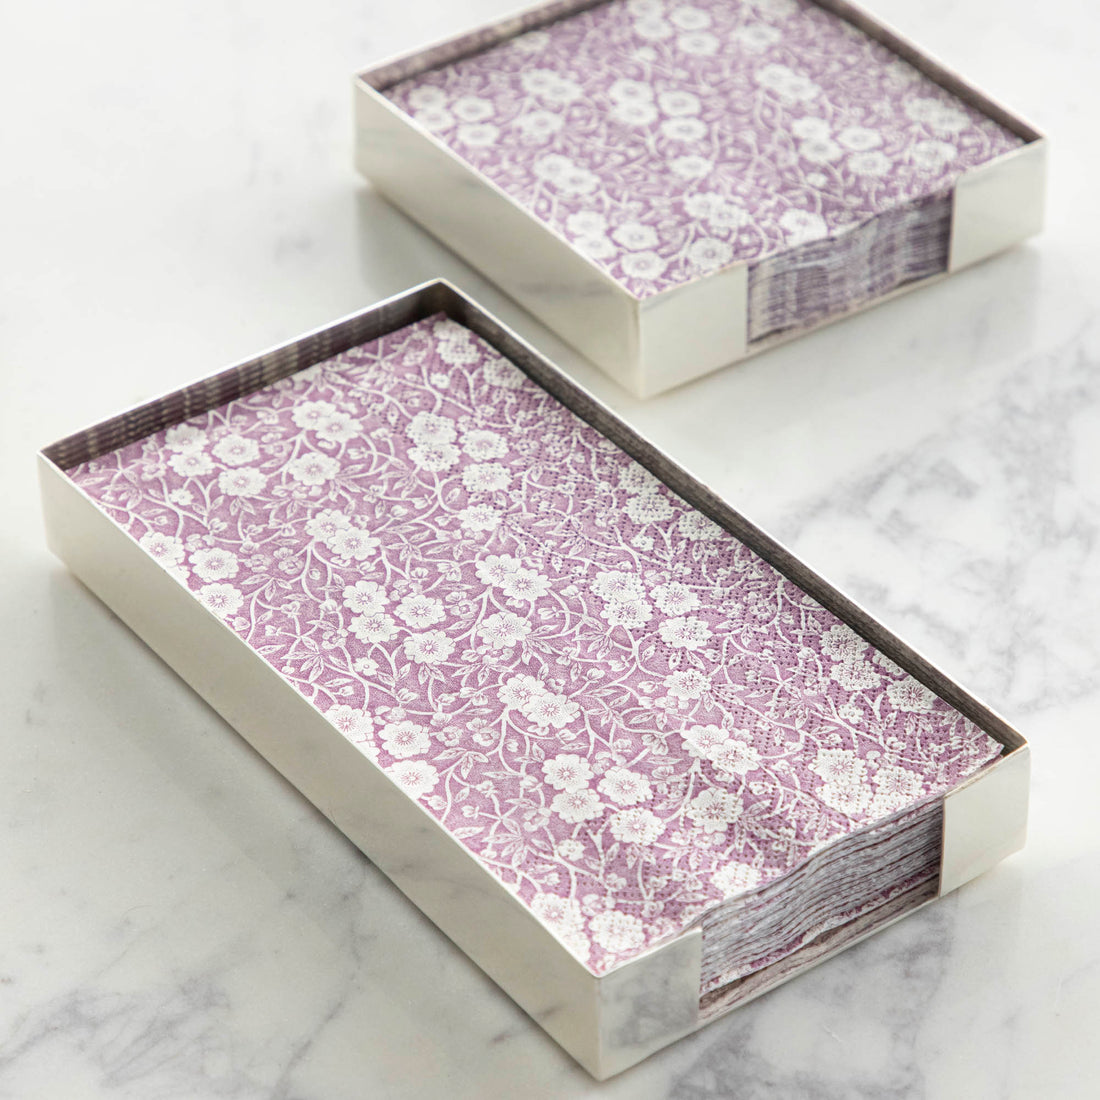 Two Silver Napkin Holders, guest-sized and cocktail-sized, containing purple and white napkins on a white table.